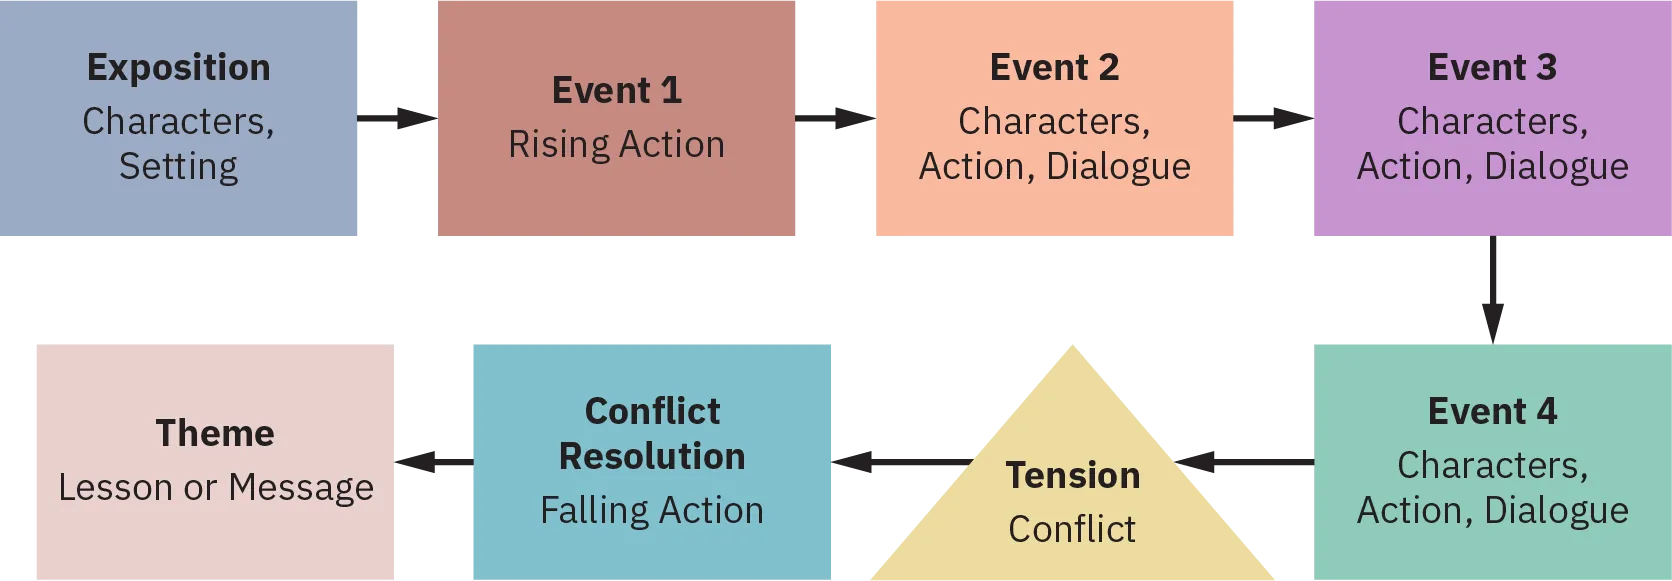 Use a horizontal flow chart with seven rectangles and one triangle for conflict connected by arrows, to list exposition (characters and setting); rising action (event 1); characters, action, and dialogue (events 2, 3, and 4); tension (conflict); conflict resolution (falling action); and theme (lesson or message).